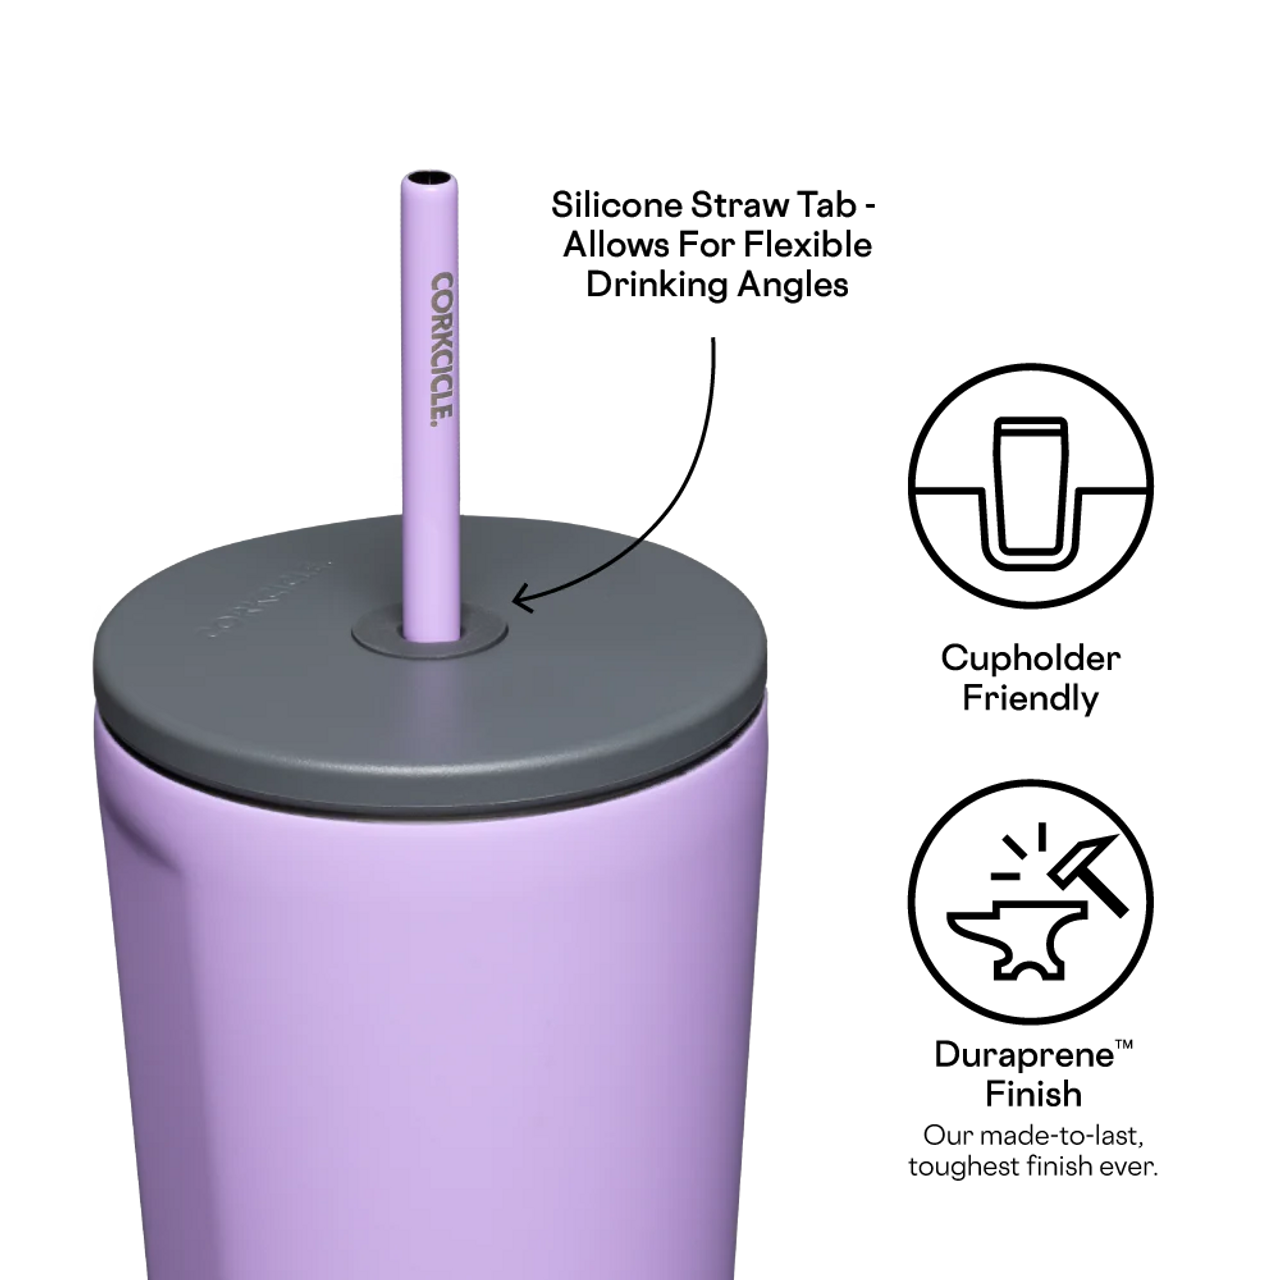 Corkcicle 24 oz. Cold Cup, Sun-soaked Lilac